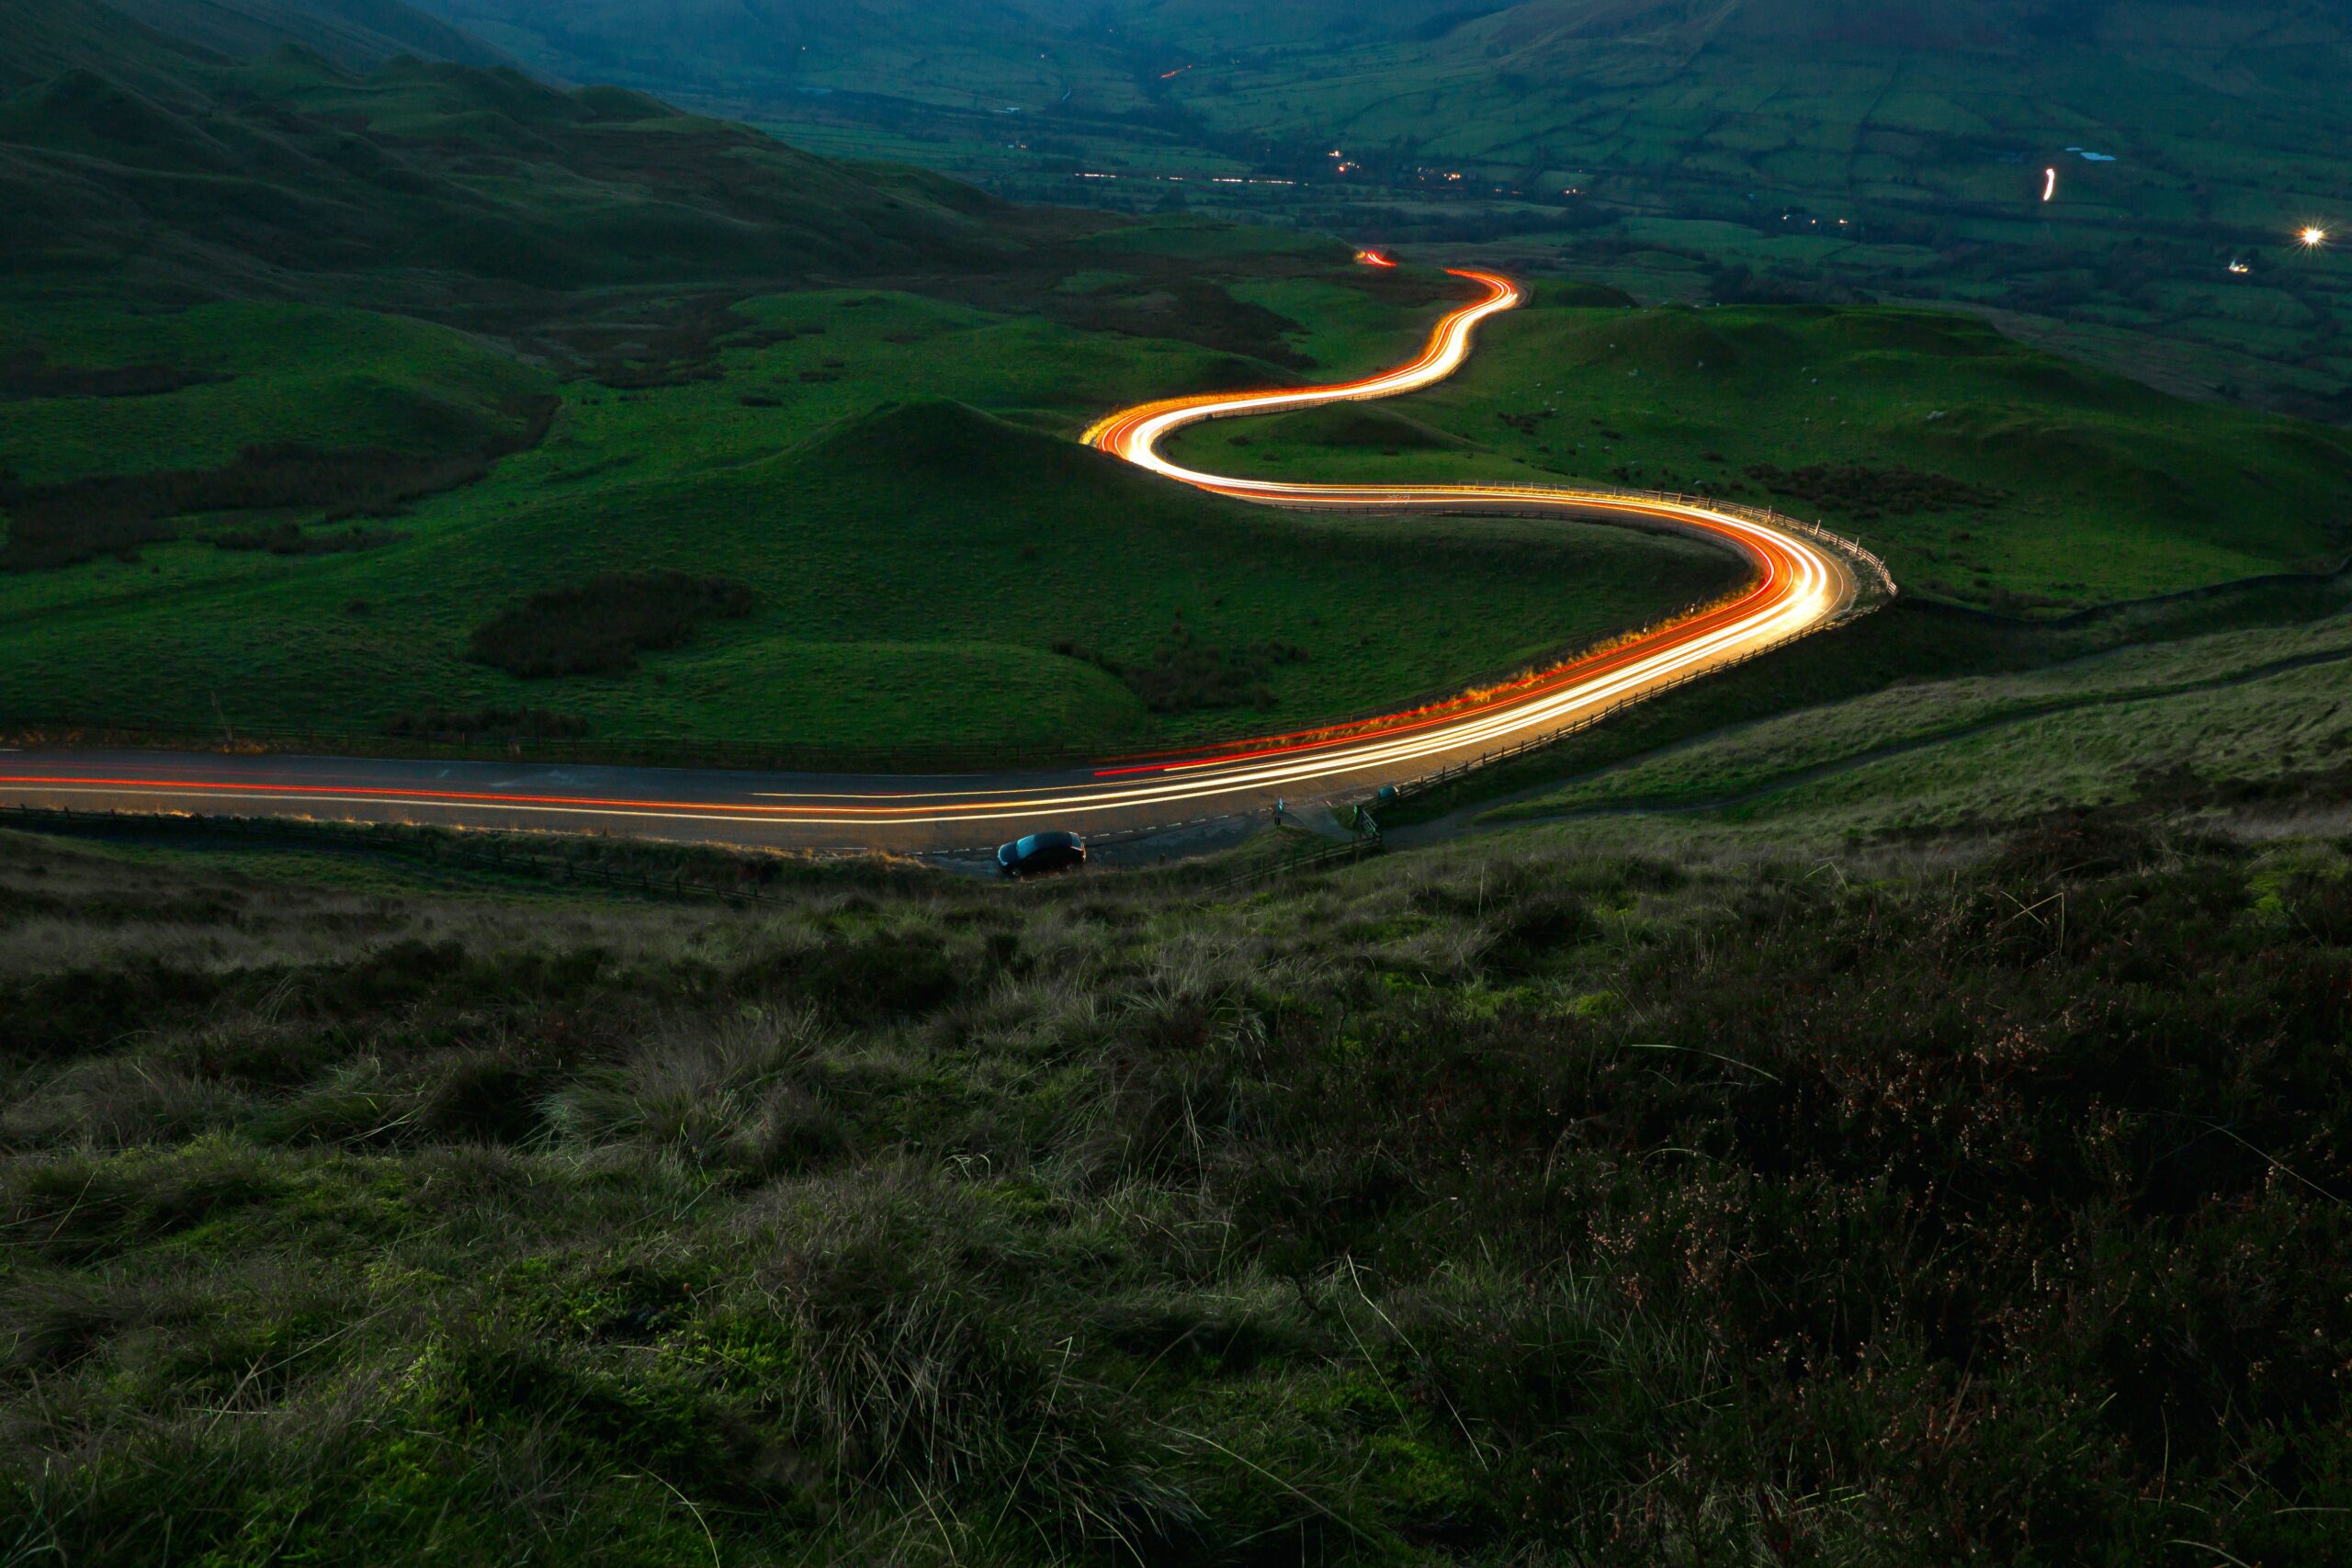 Landscape at dusk with a long exposure car light.